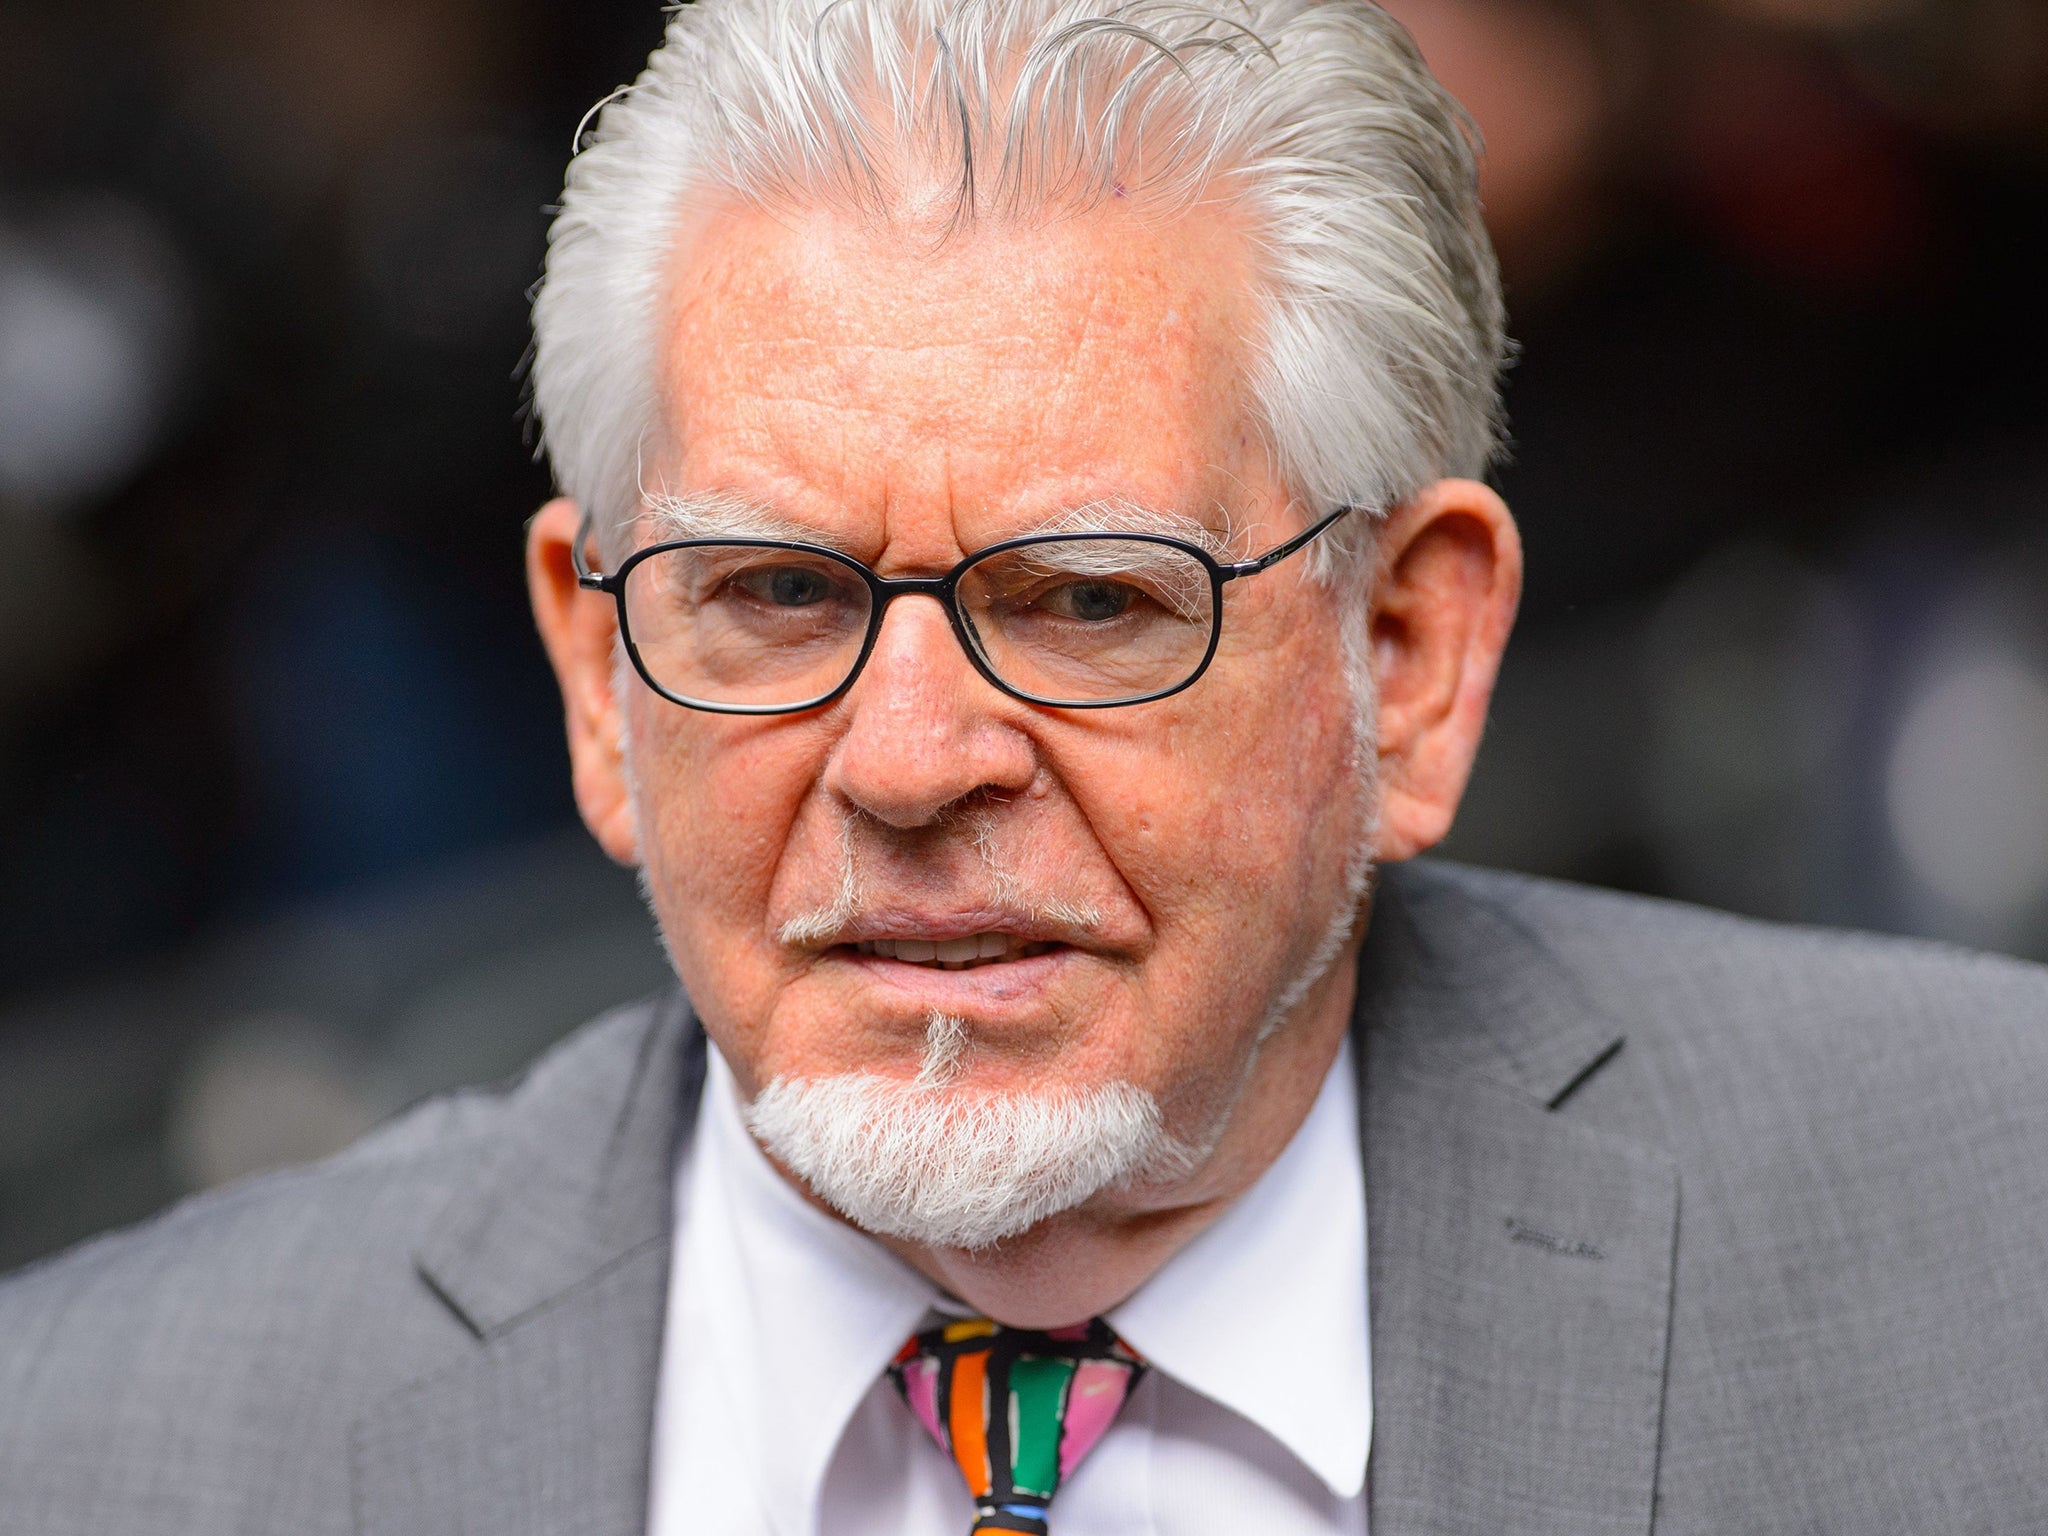 Rolf Harris arrives at Southwark Crown Court before he was sentenced for a string of indecent assaults